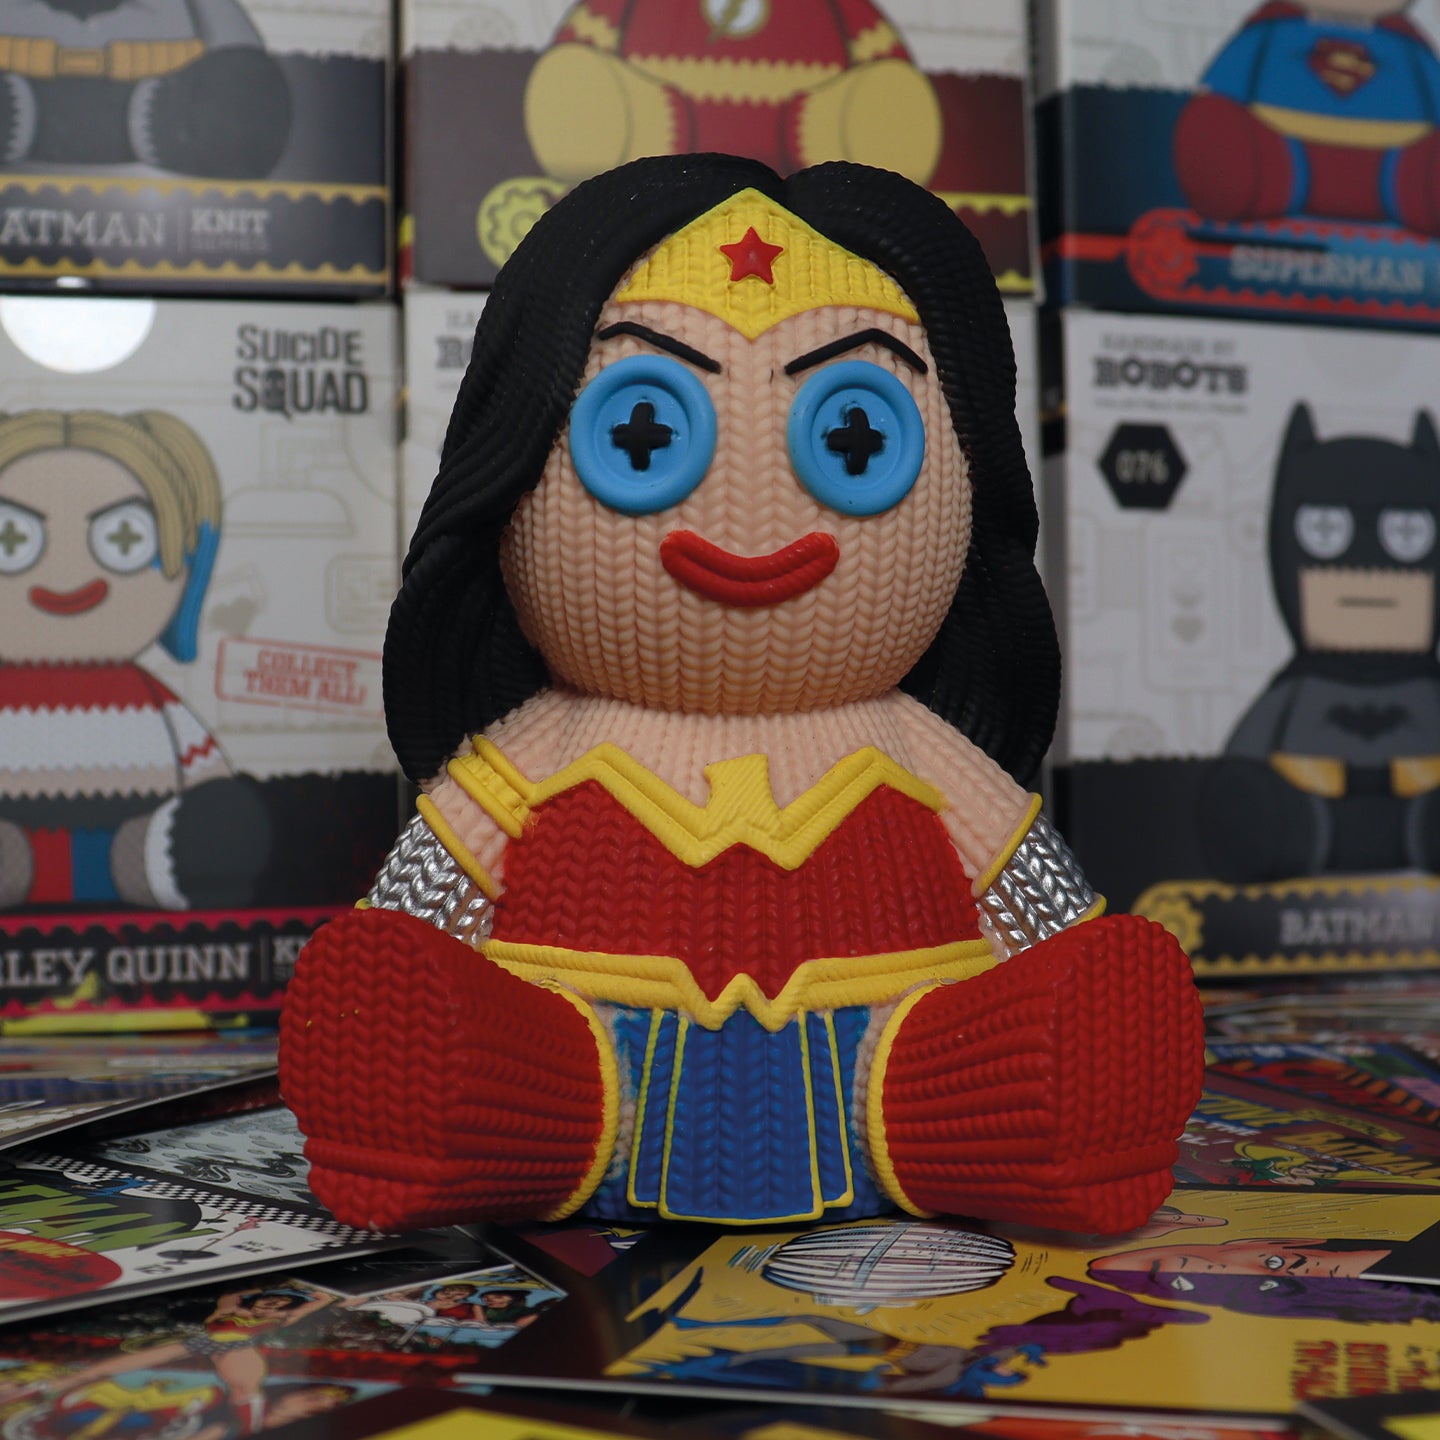 DC - Wonder Woman Collectible Vinyl Figure from Handmade By Robots